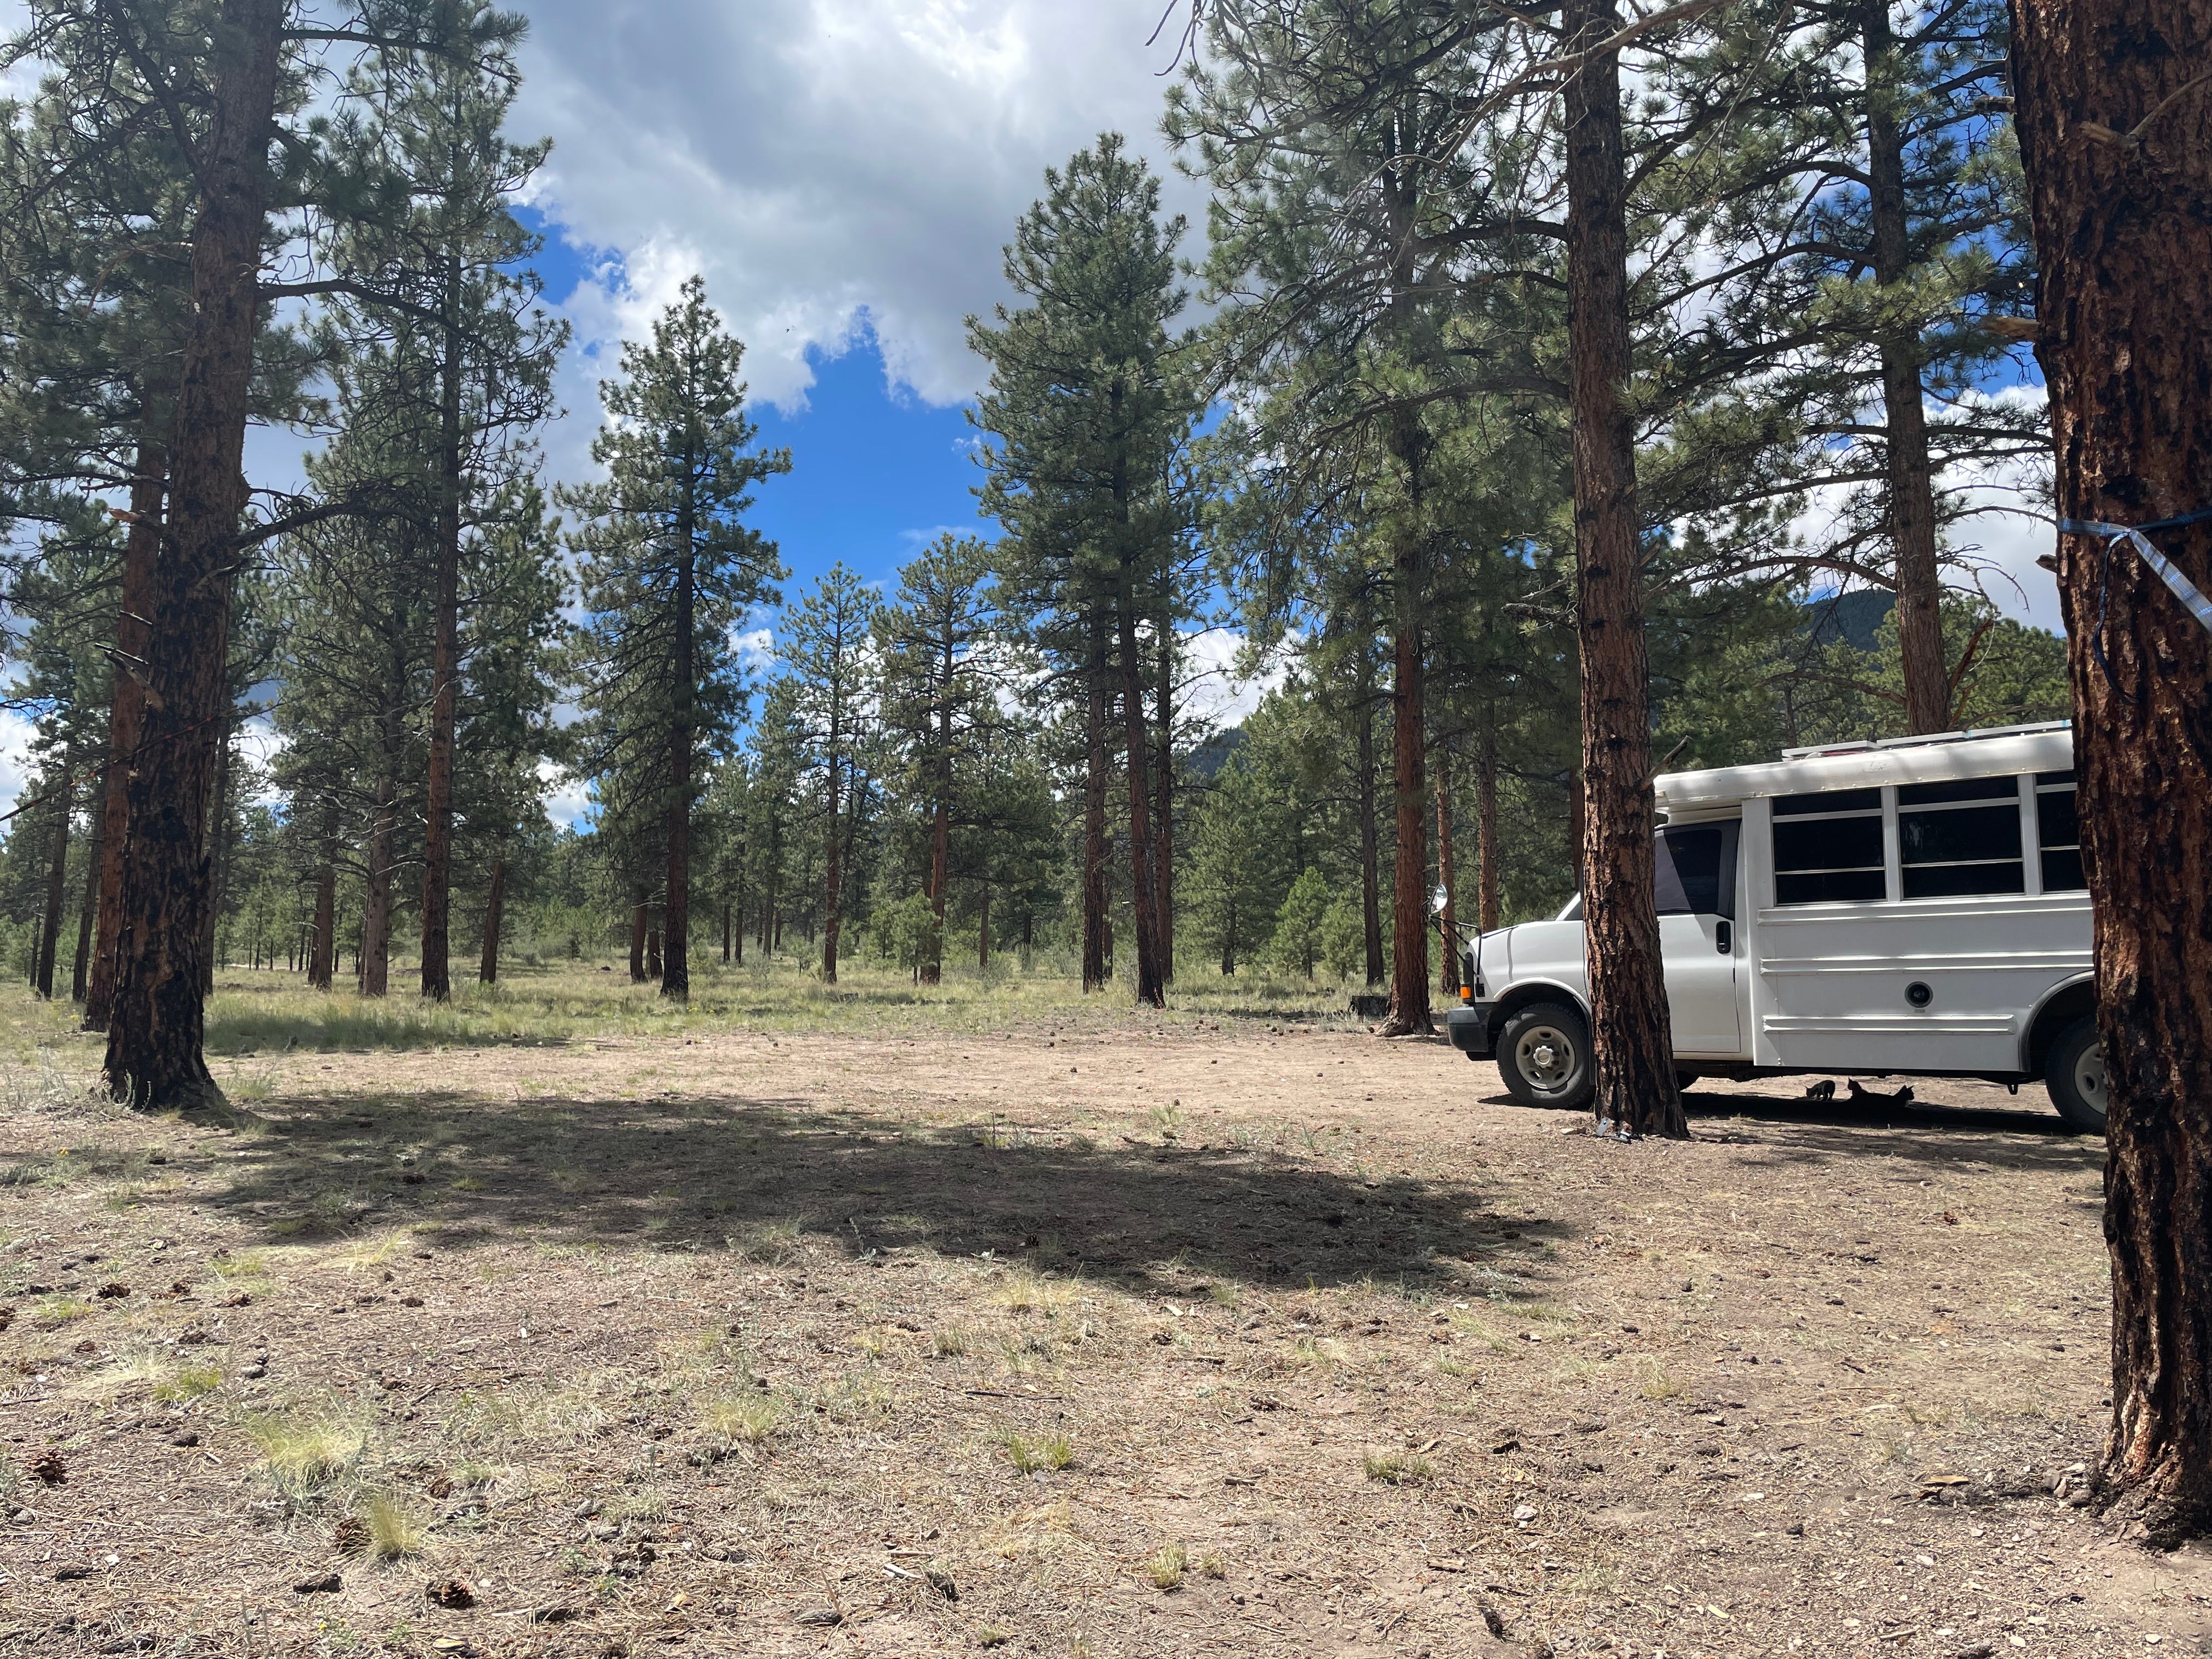 Camper submitted image from Raspberry Gulch Dispersed Site - 3